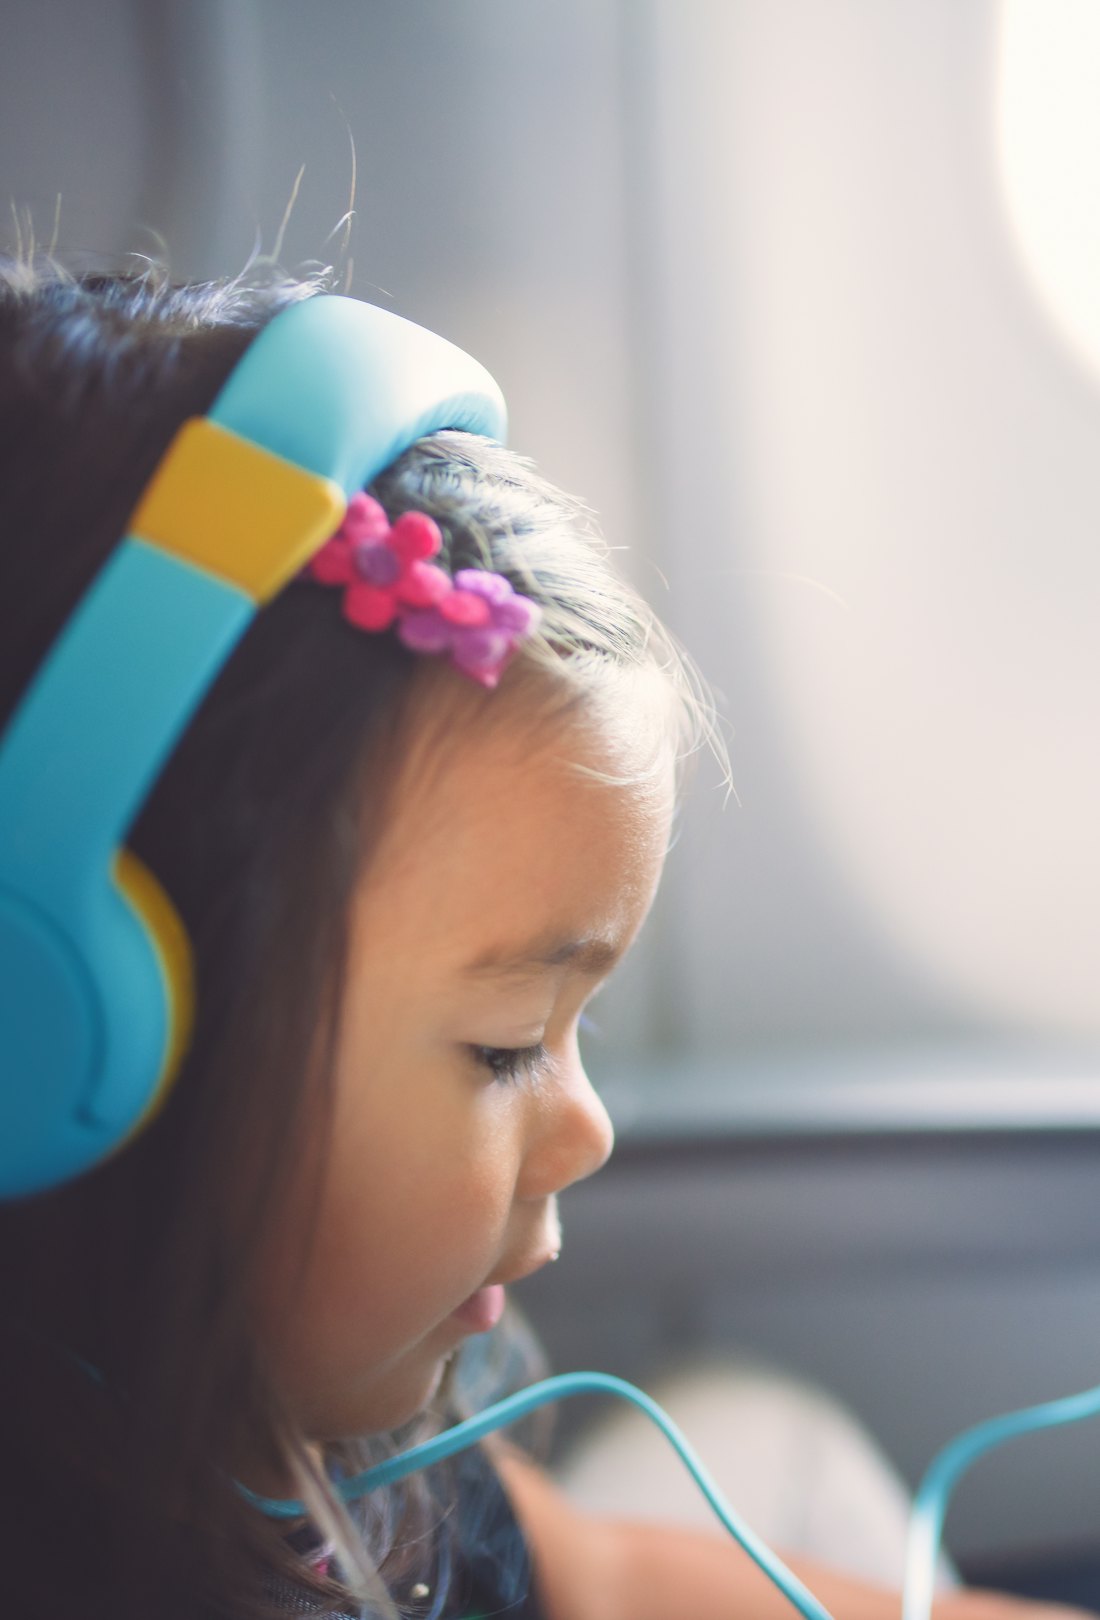 Young girl on an airplane listening to music on her headphones